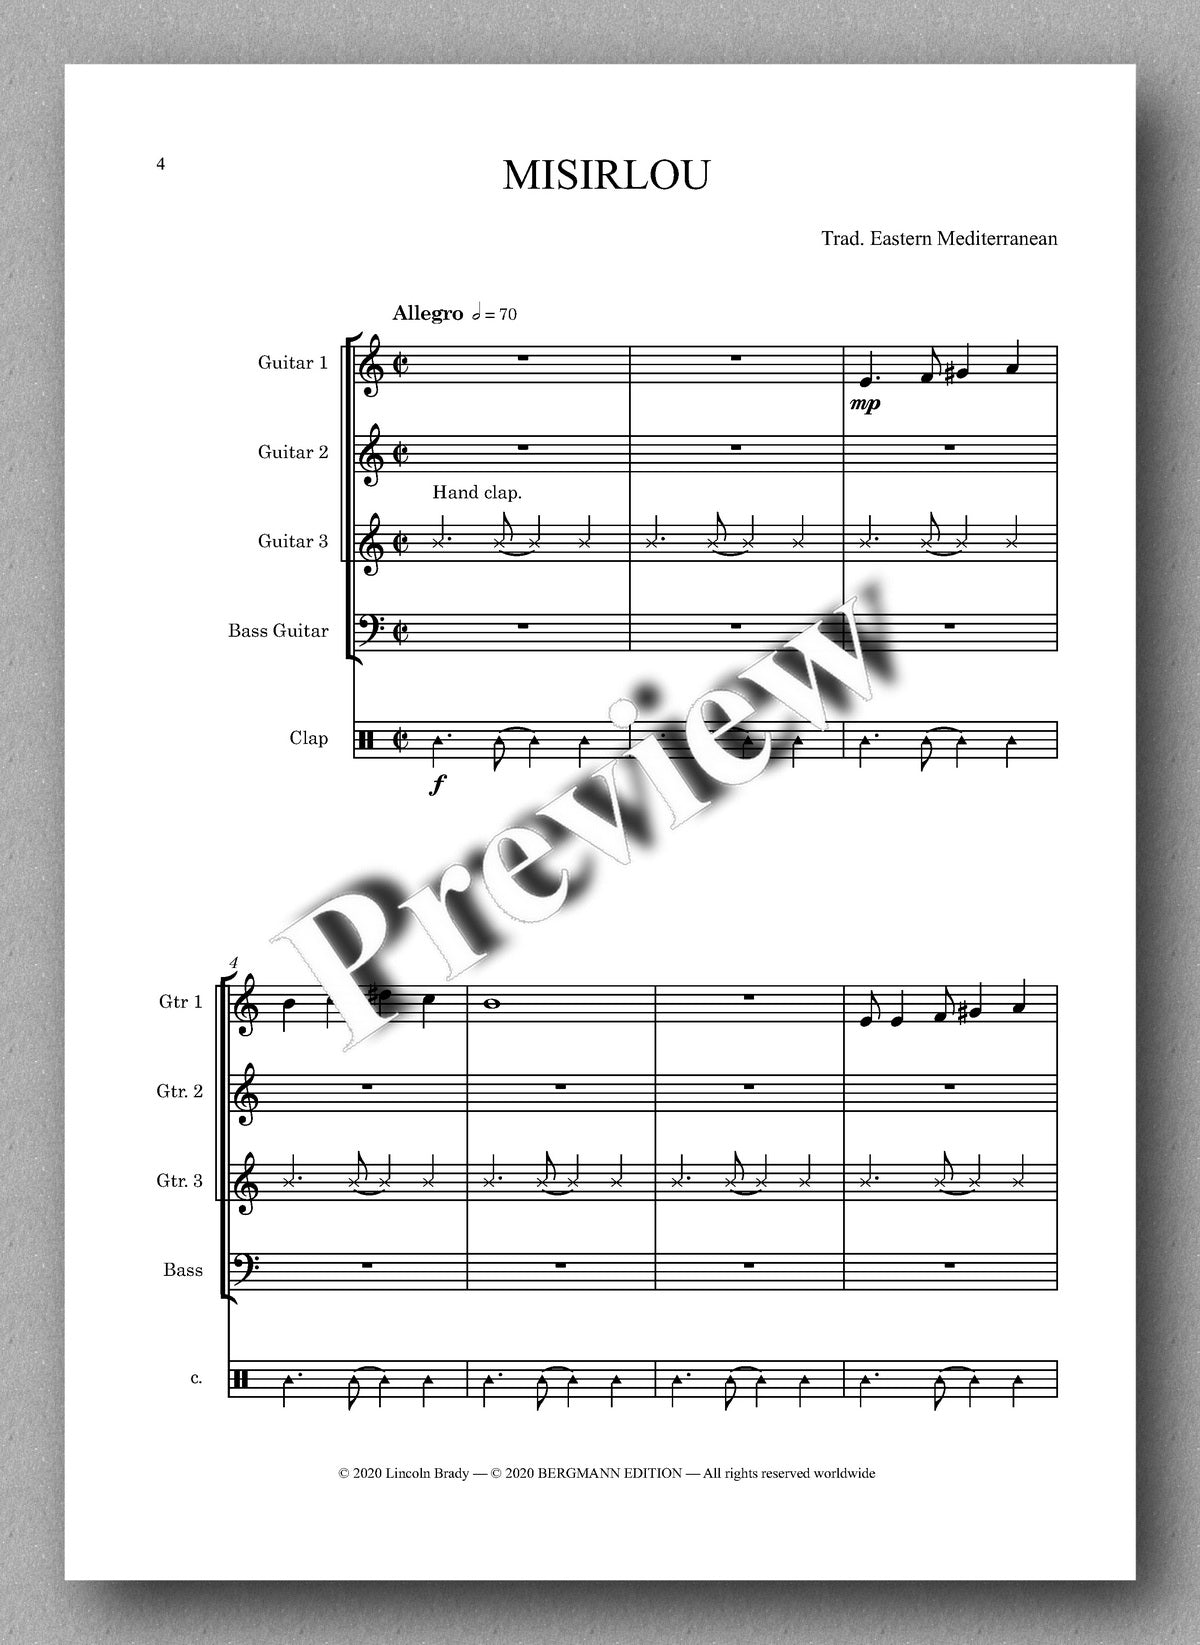 Lincoln Brady, Misirlou - preview of the music score 1